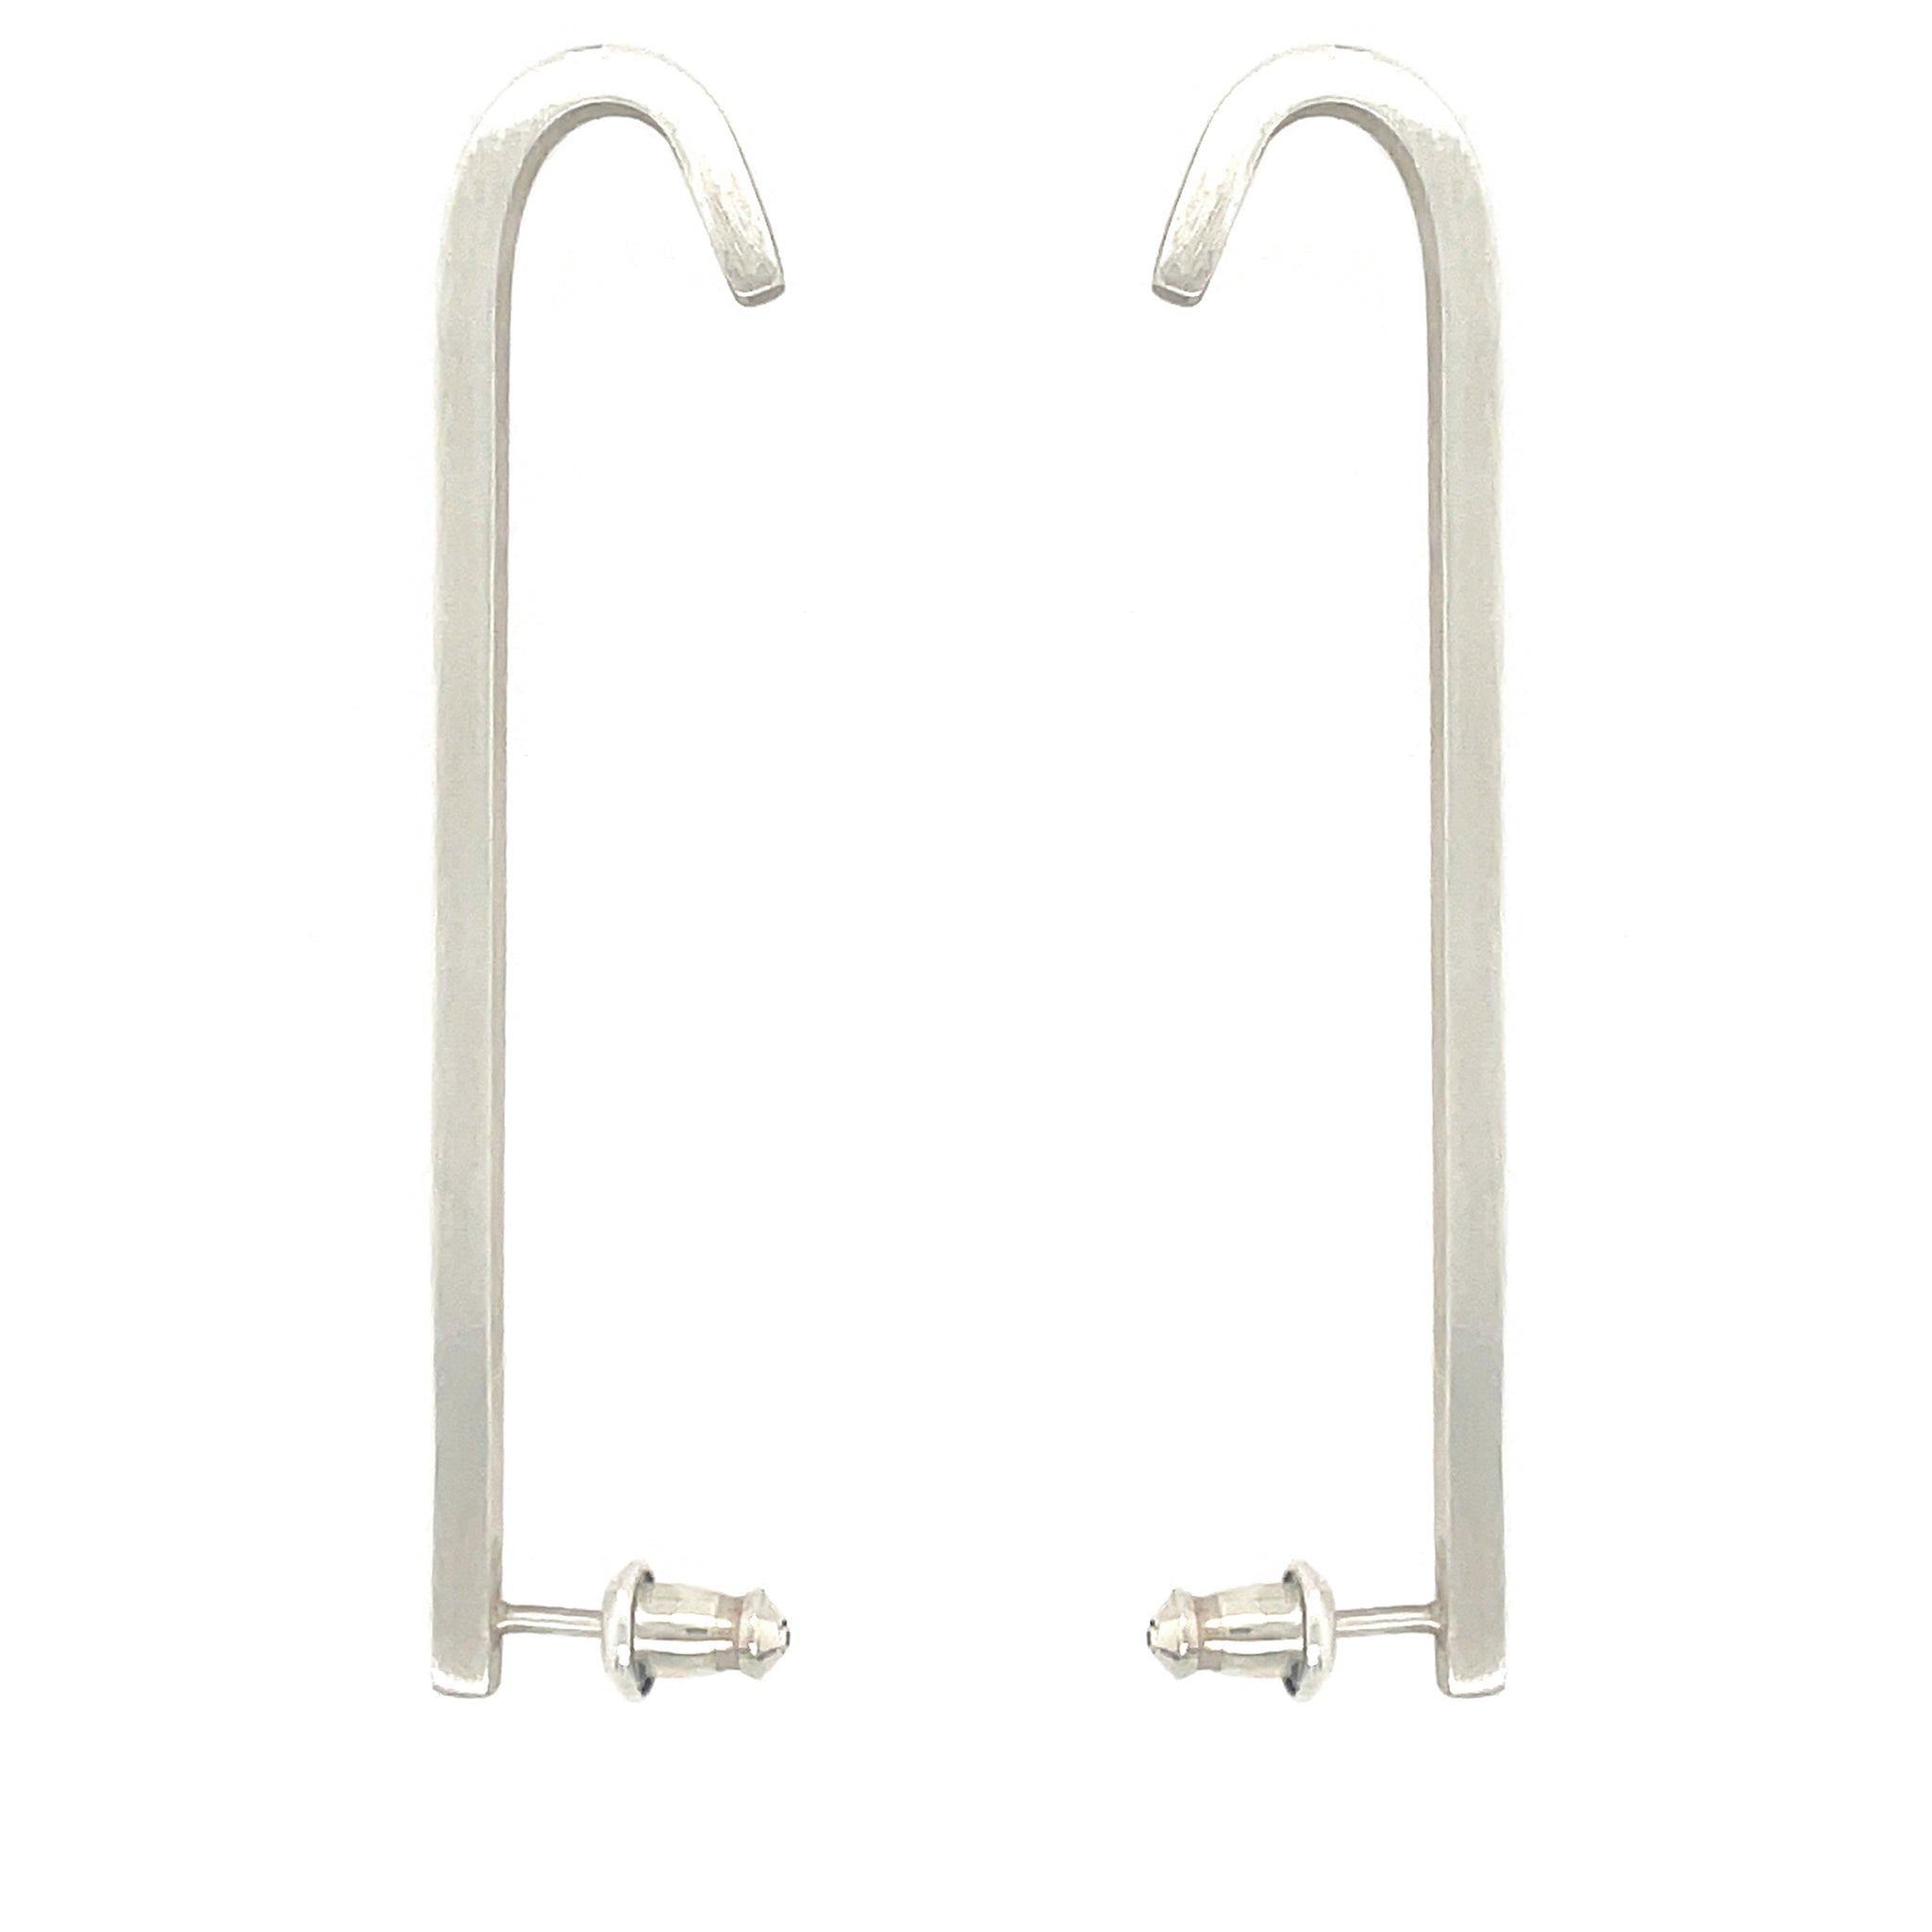 Image shows 2 upside down J shaped earrings made out of sterling silver and that has a matte brushed finish. Bullet style earring backs for added support. The Ear bars are made out of square wire, which gives this earring 4 flat sides.